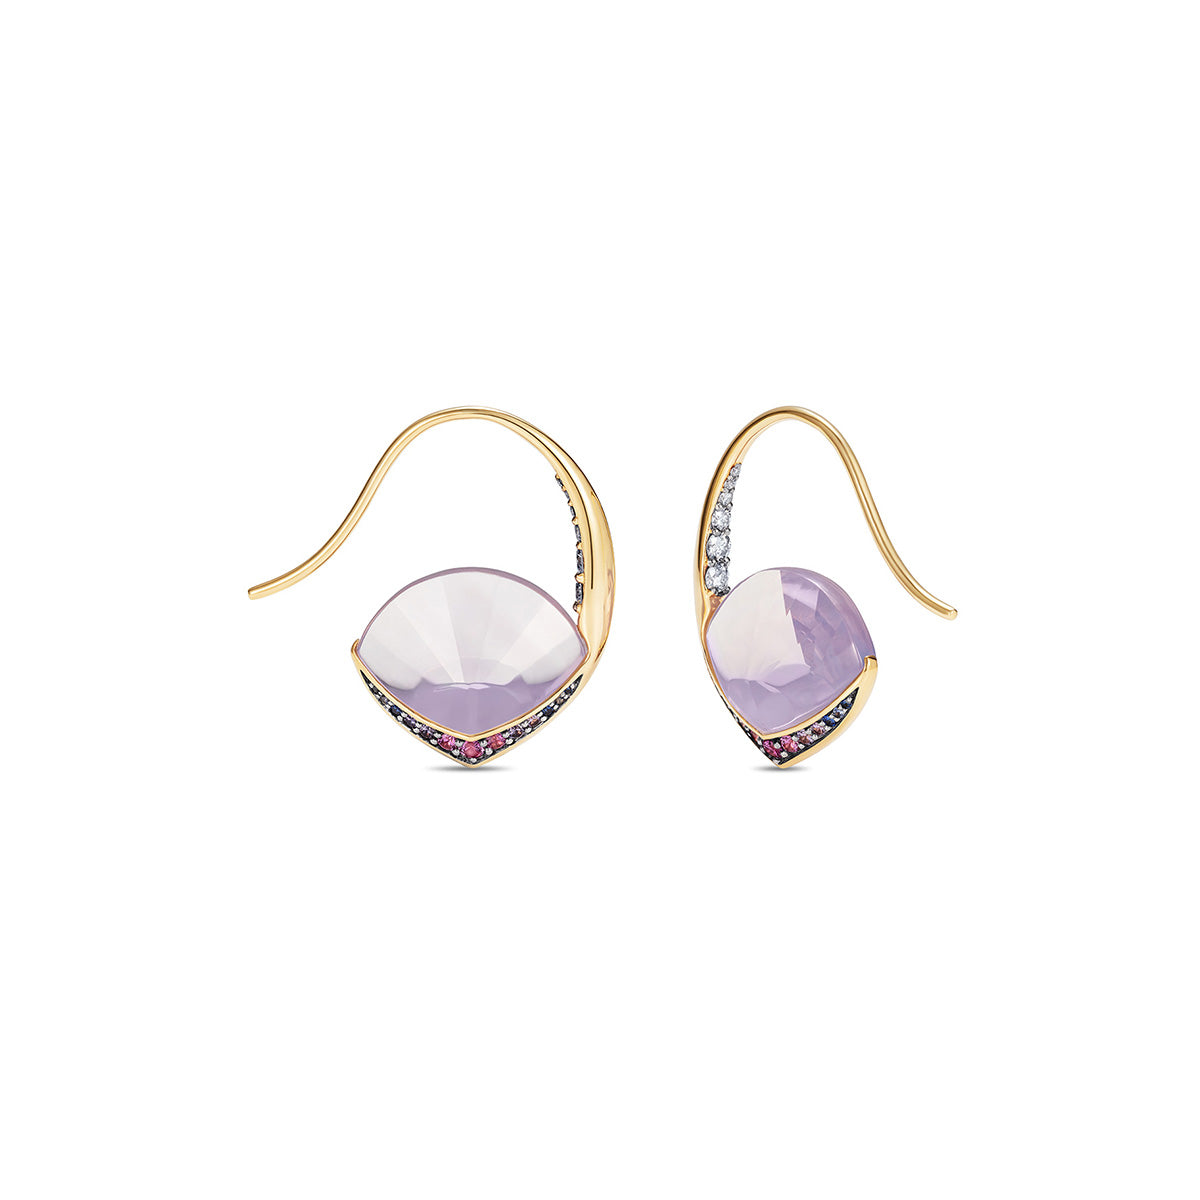 Noor Fares Yellow Gold Lavender Quartz Earrings with Sapphires and Diamond Pavé